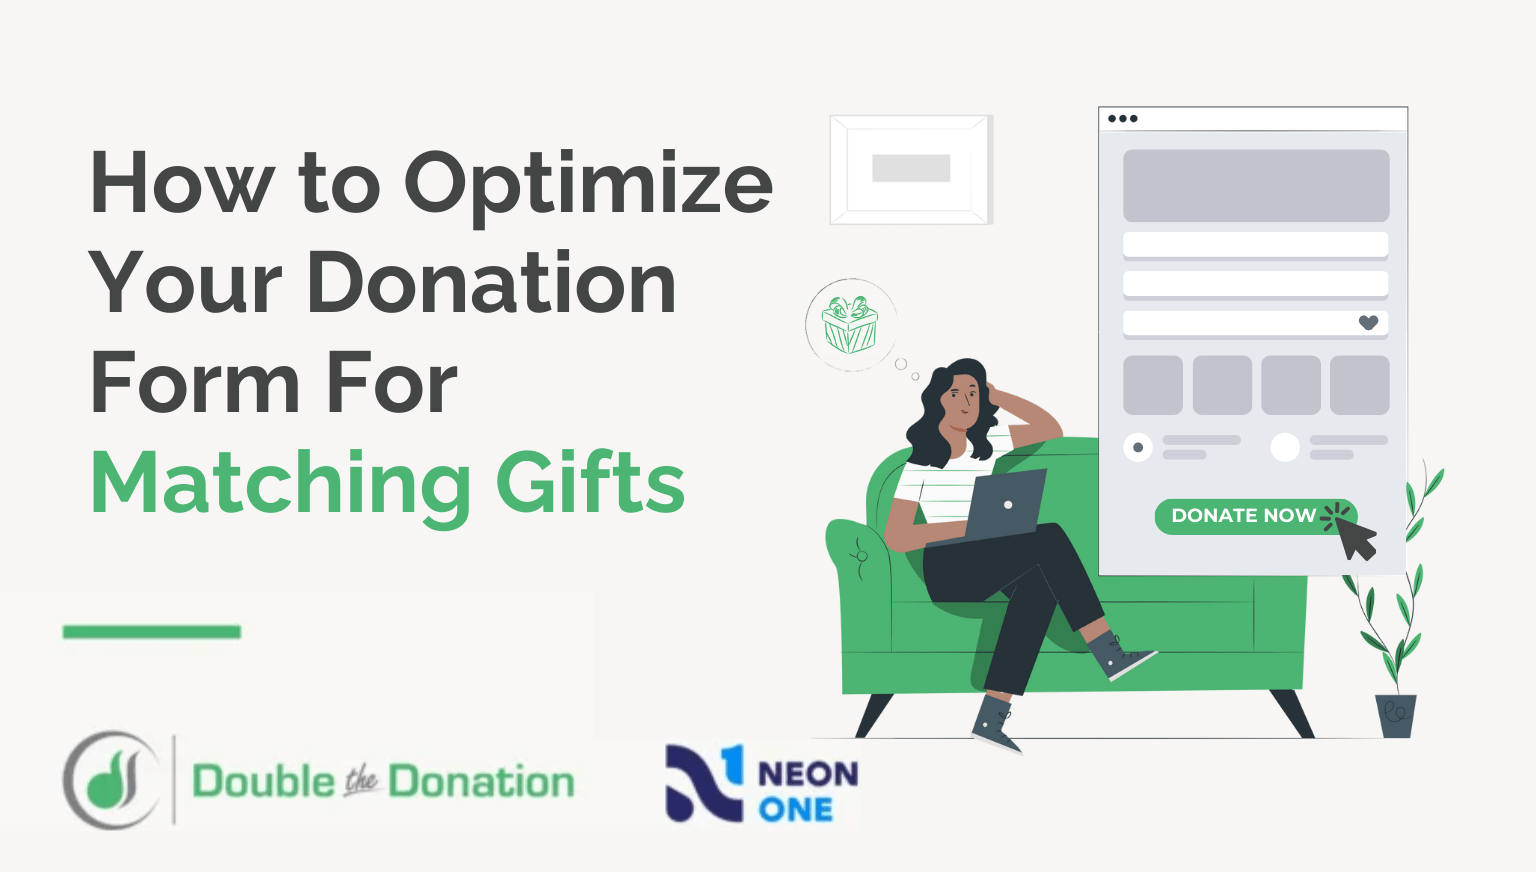 How to Market Matching Gifts  4 Tips for Nonprofits - GiveForms Blog